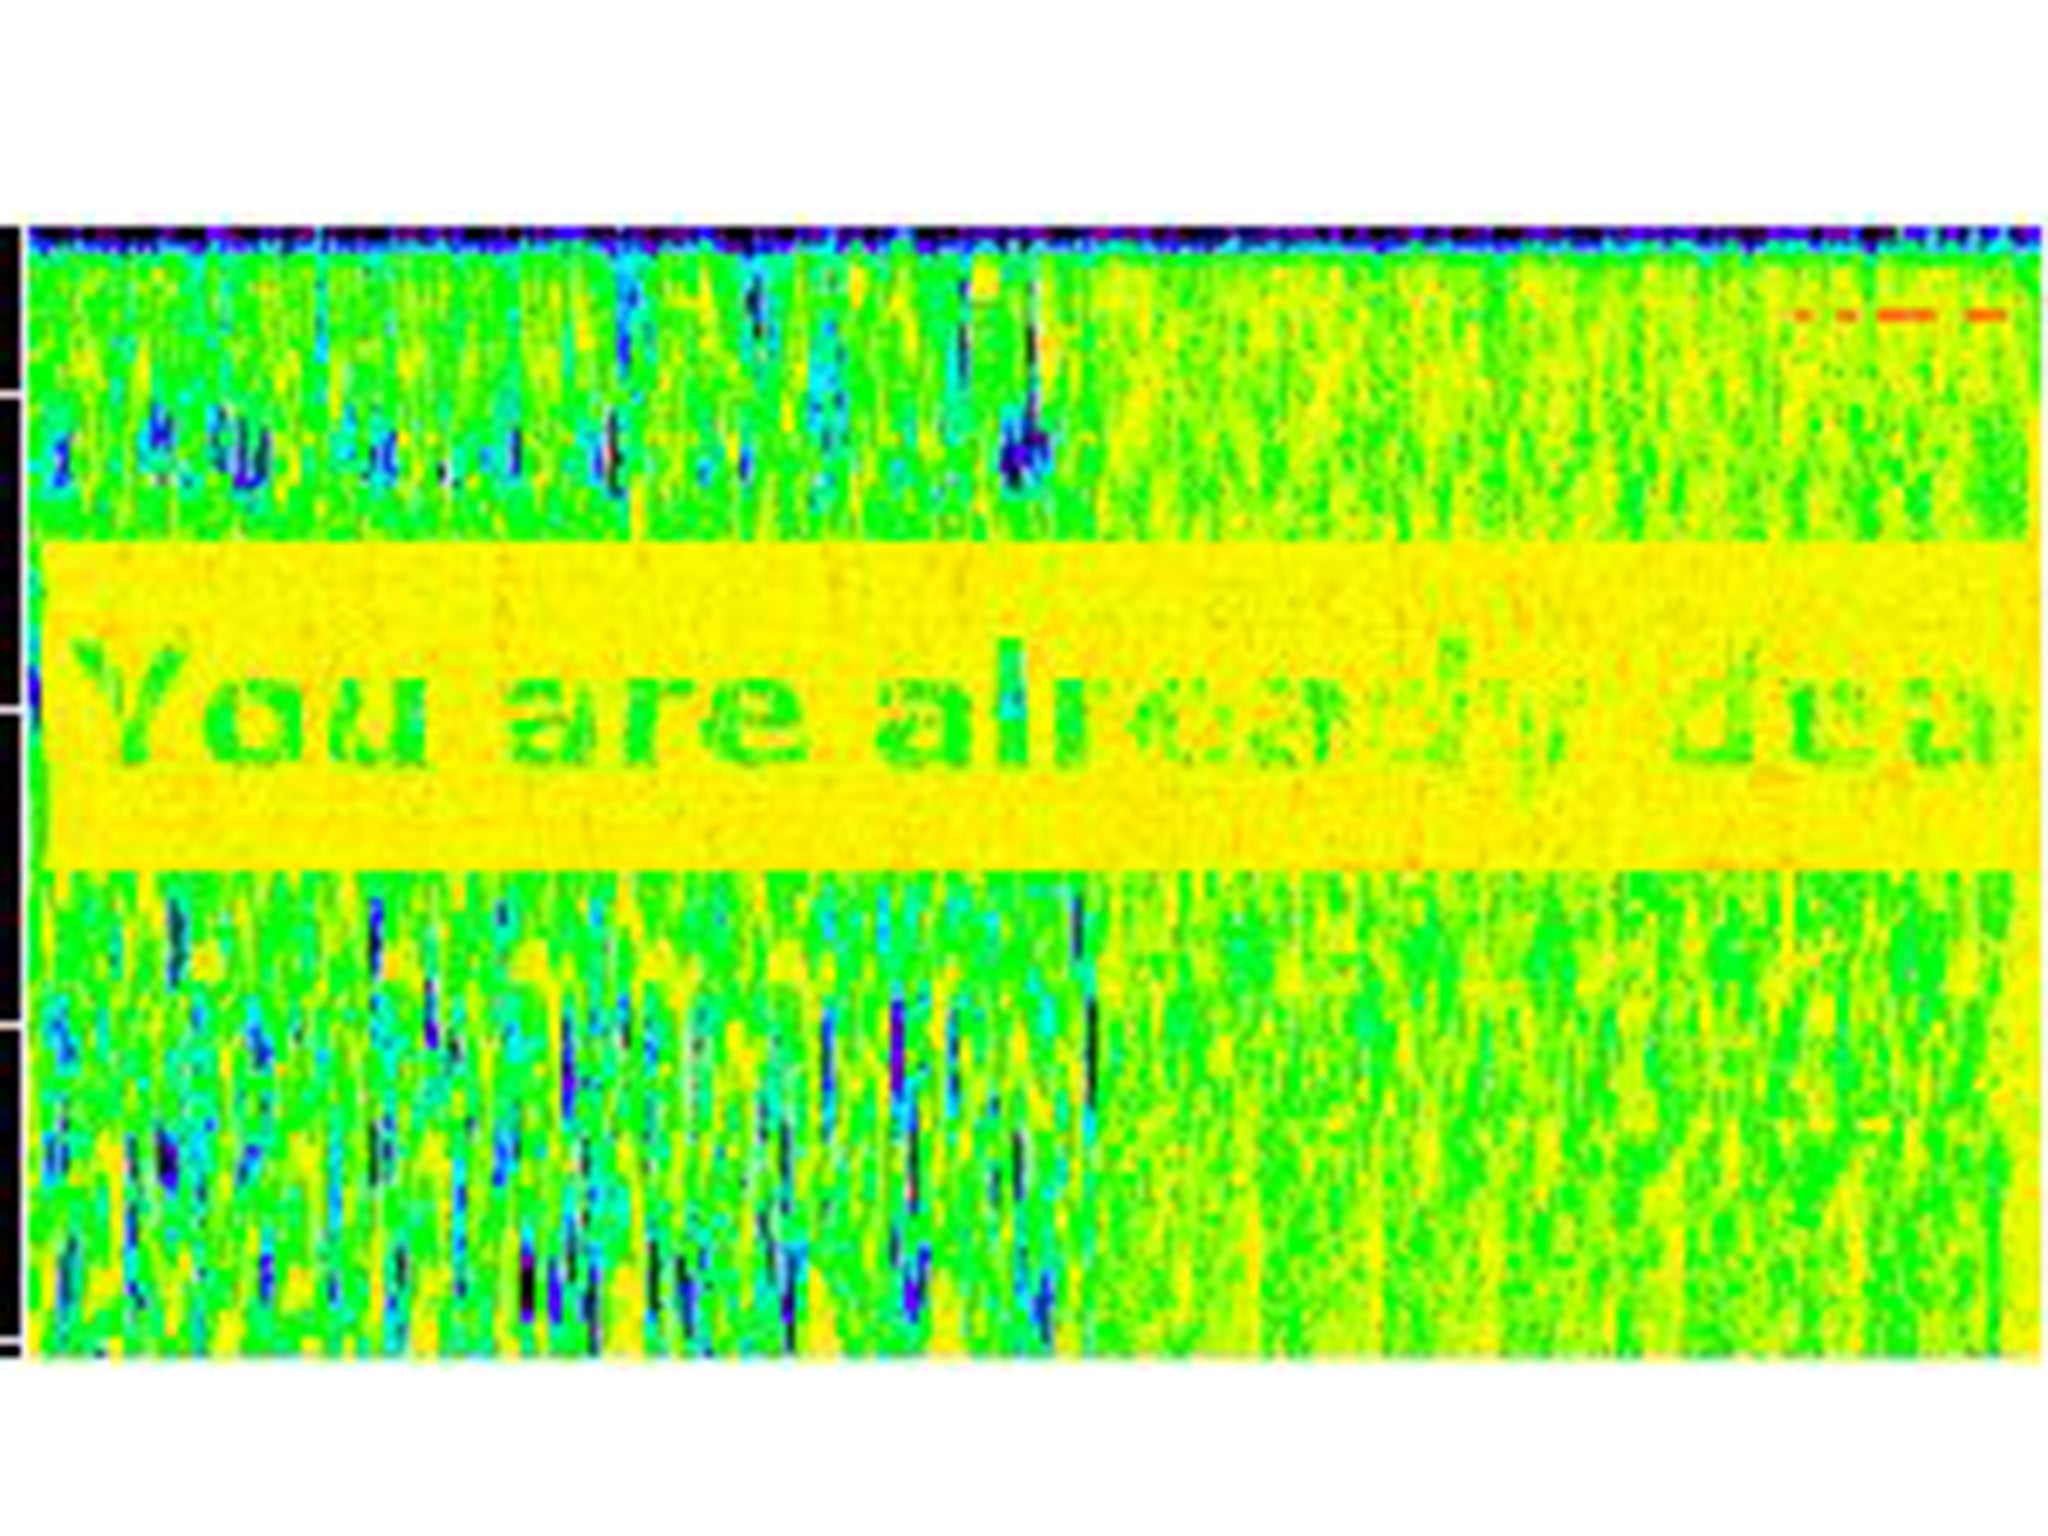 Partial spectogram of the videos sound, run by author